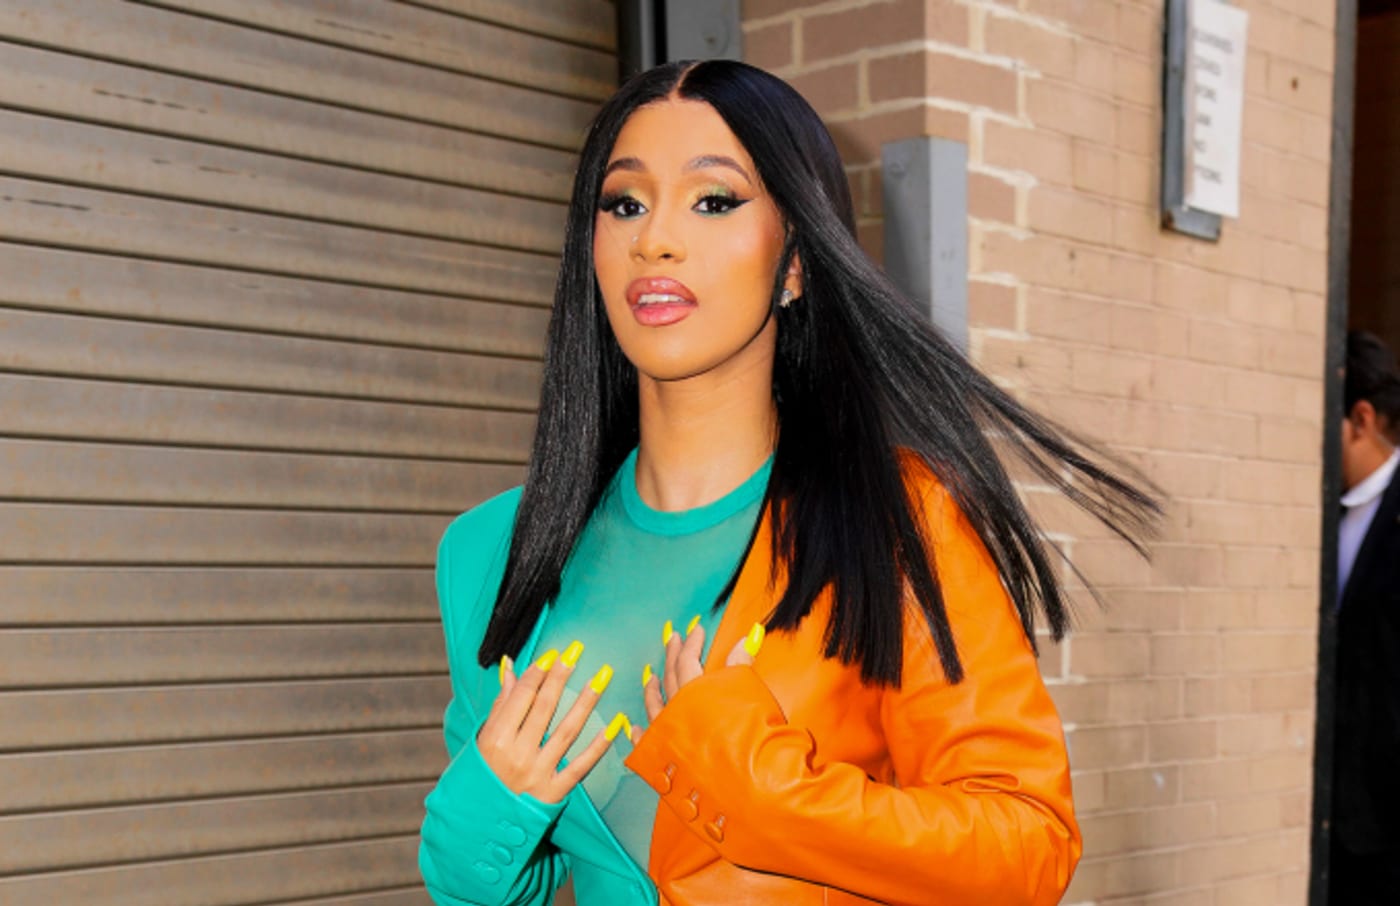 Cardi B at Vogue event on October 10, 2019